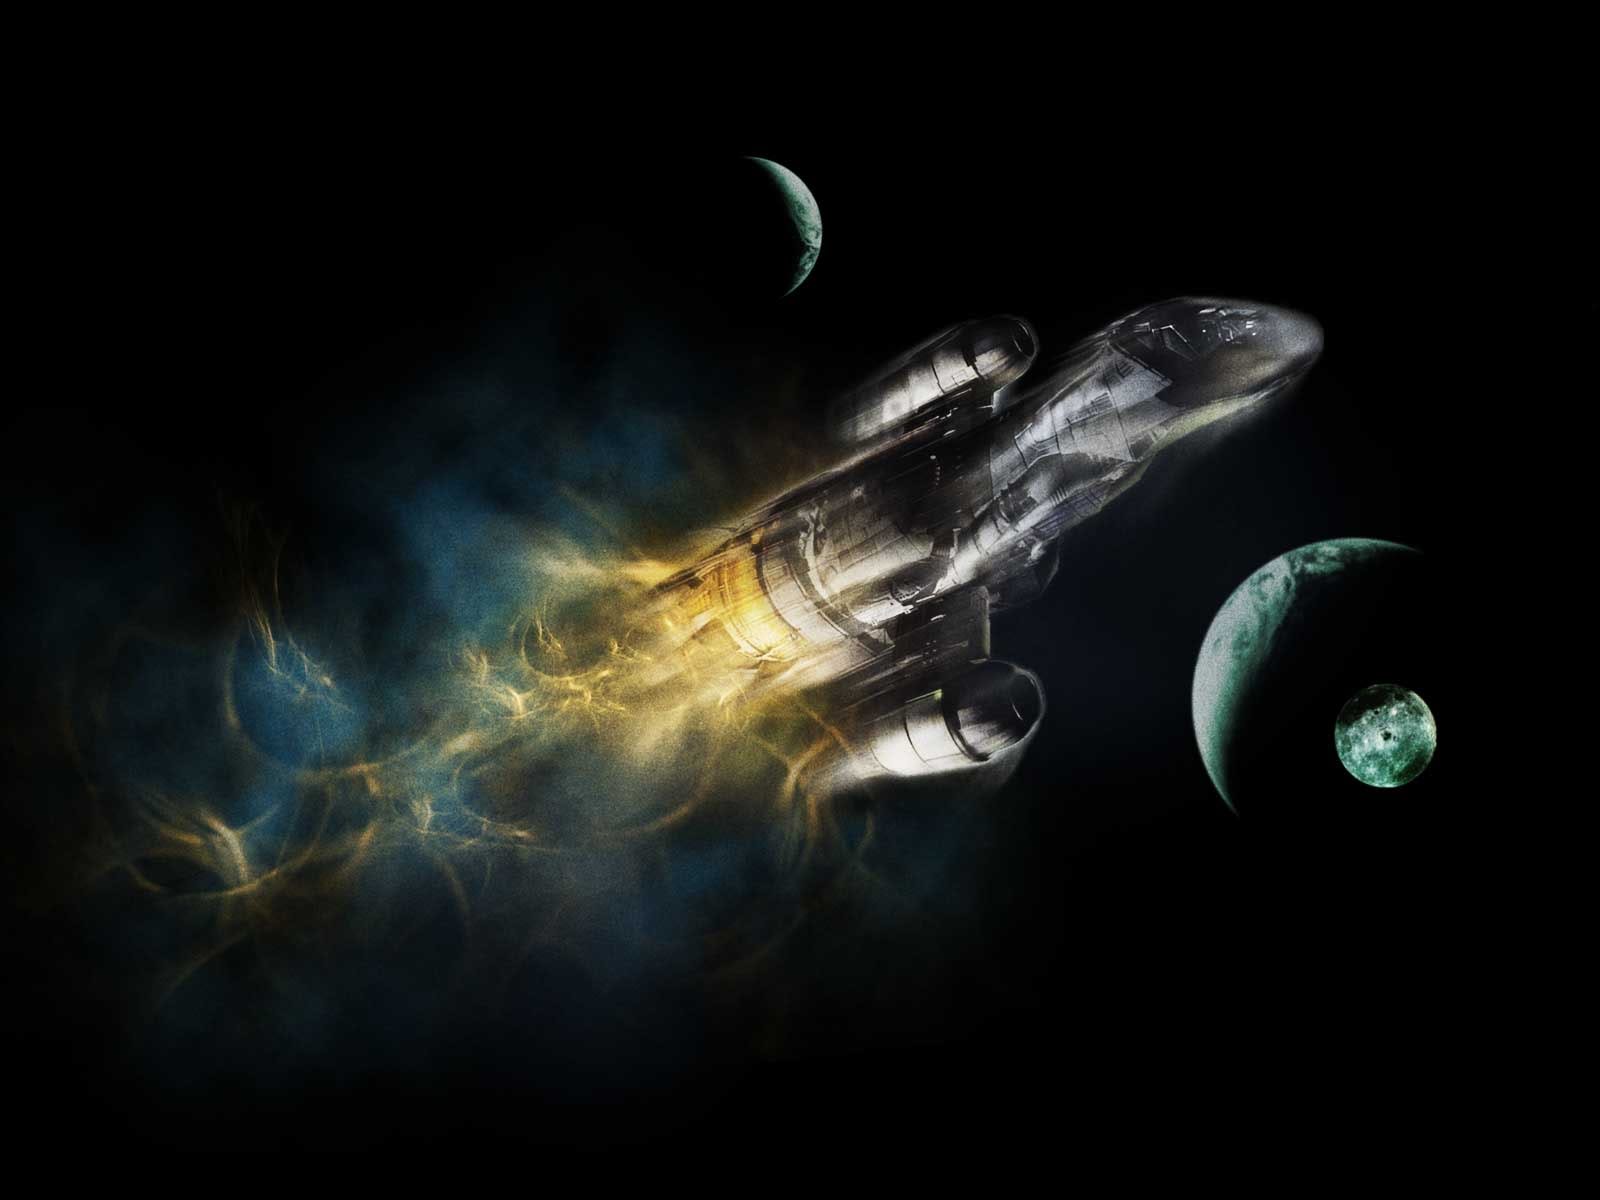 Firefly Serenity Best Widescreen Background Awesome